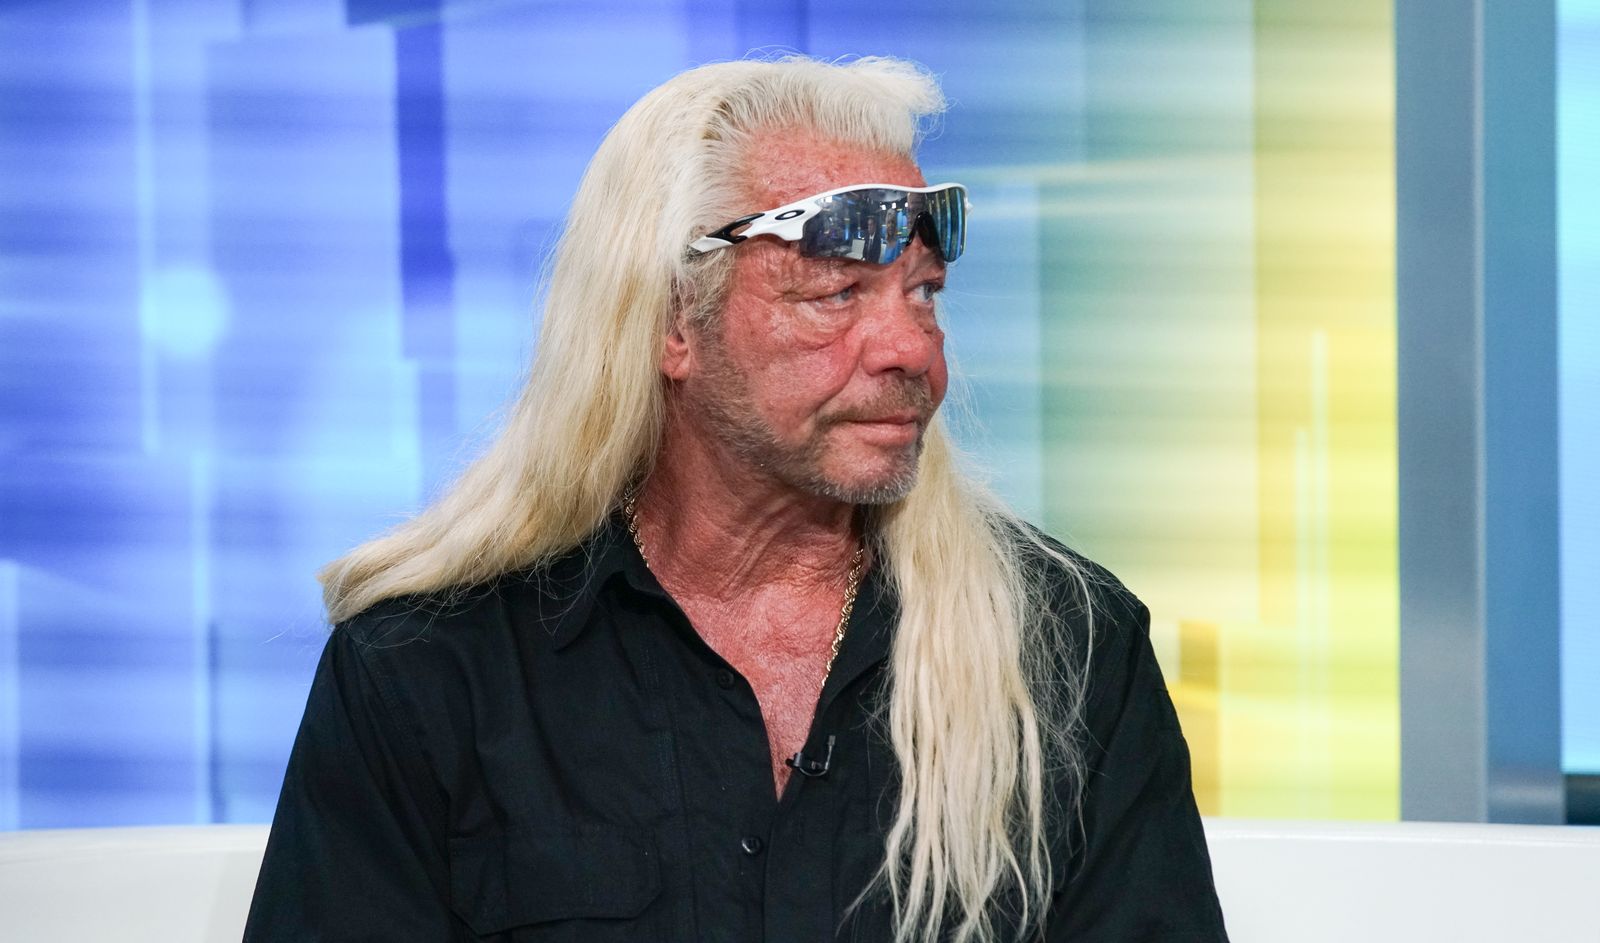 Dog the Bounty Hunter visits "FOX & Friends" at FOX Studios on August 28, 2019 | Getty Images